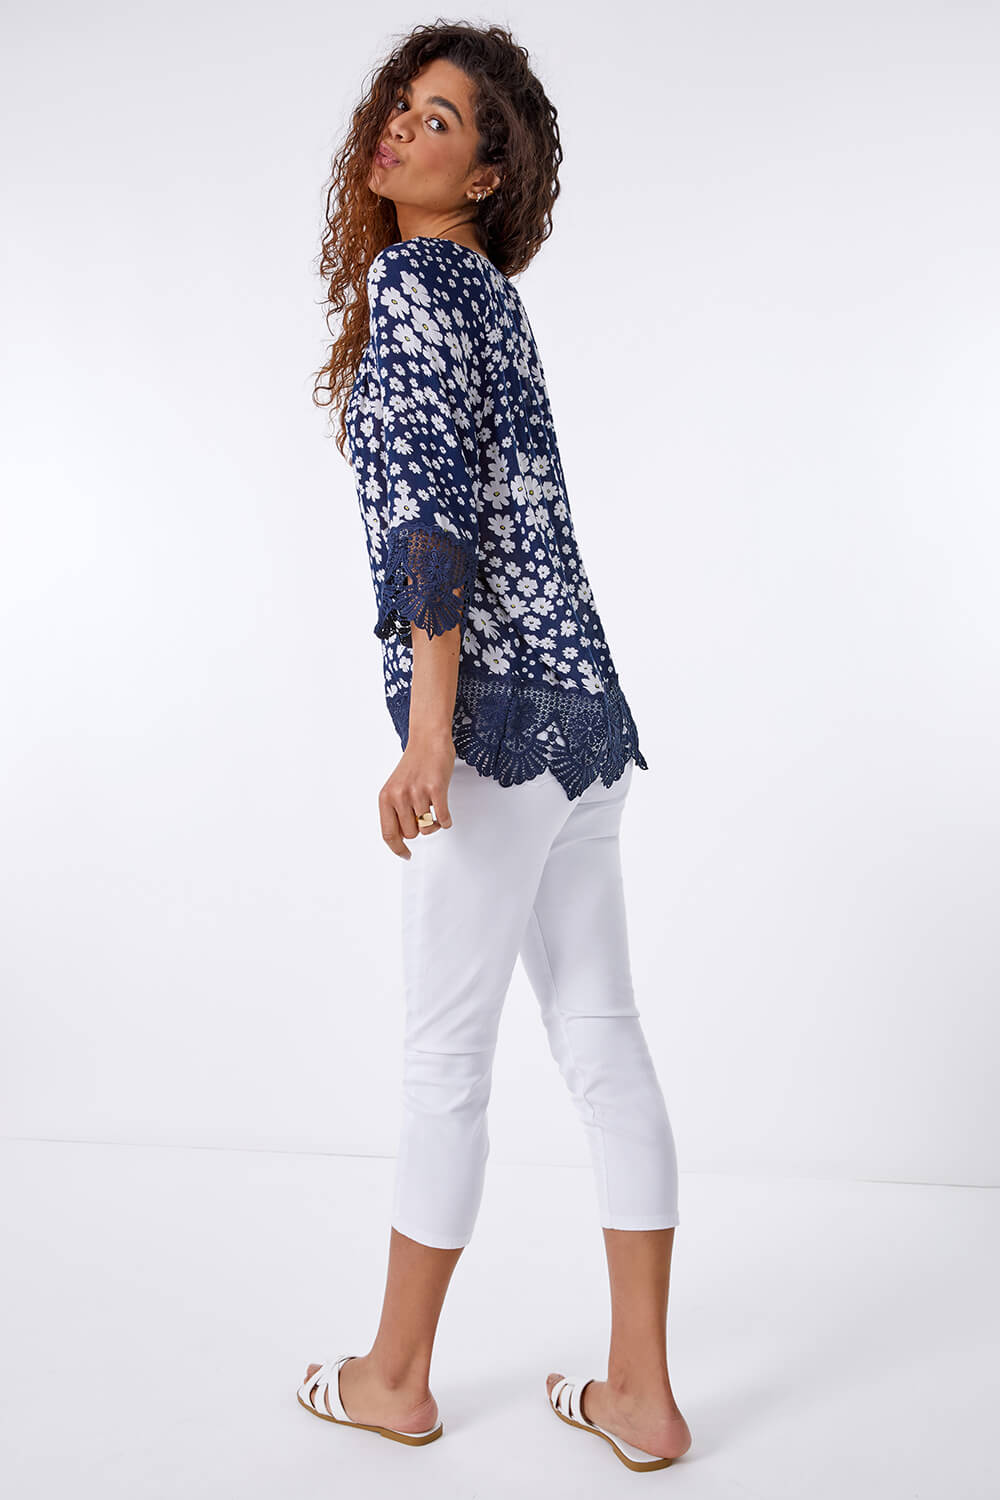 Navy  Floral Print Lace Trim Top, Image 3 of 4